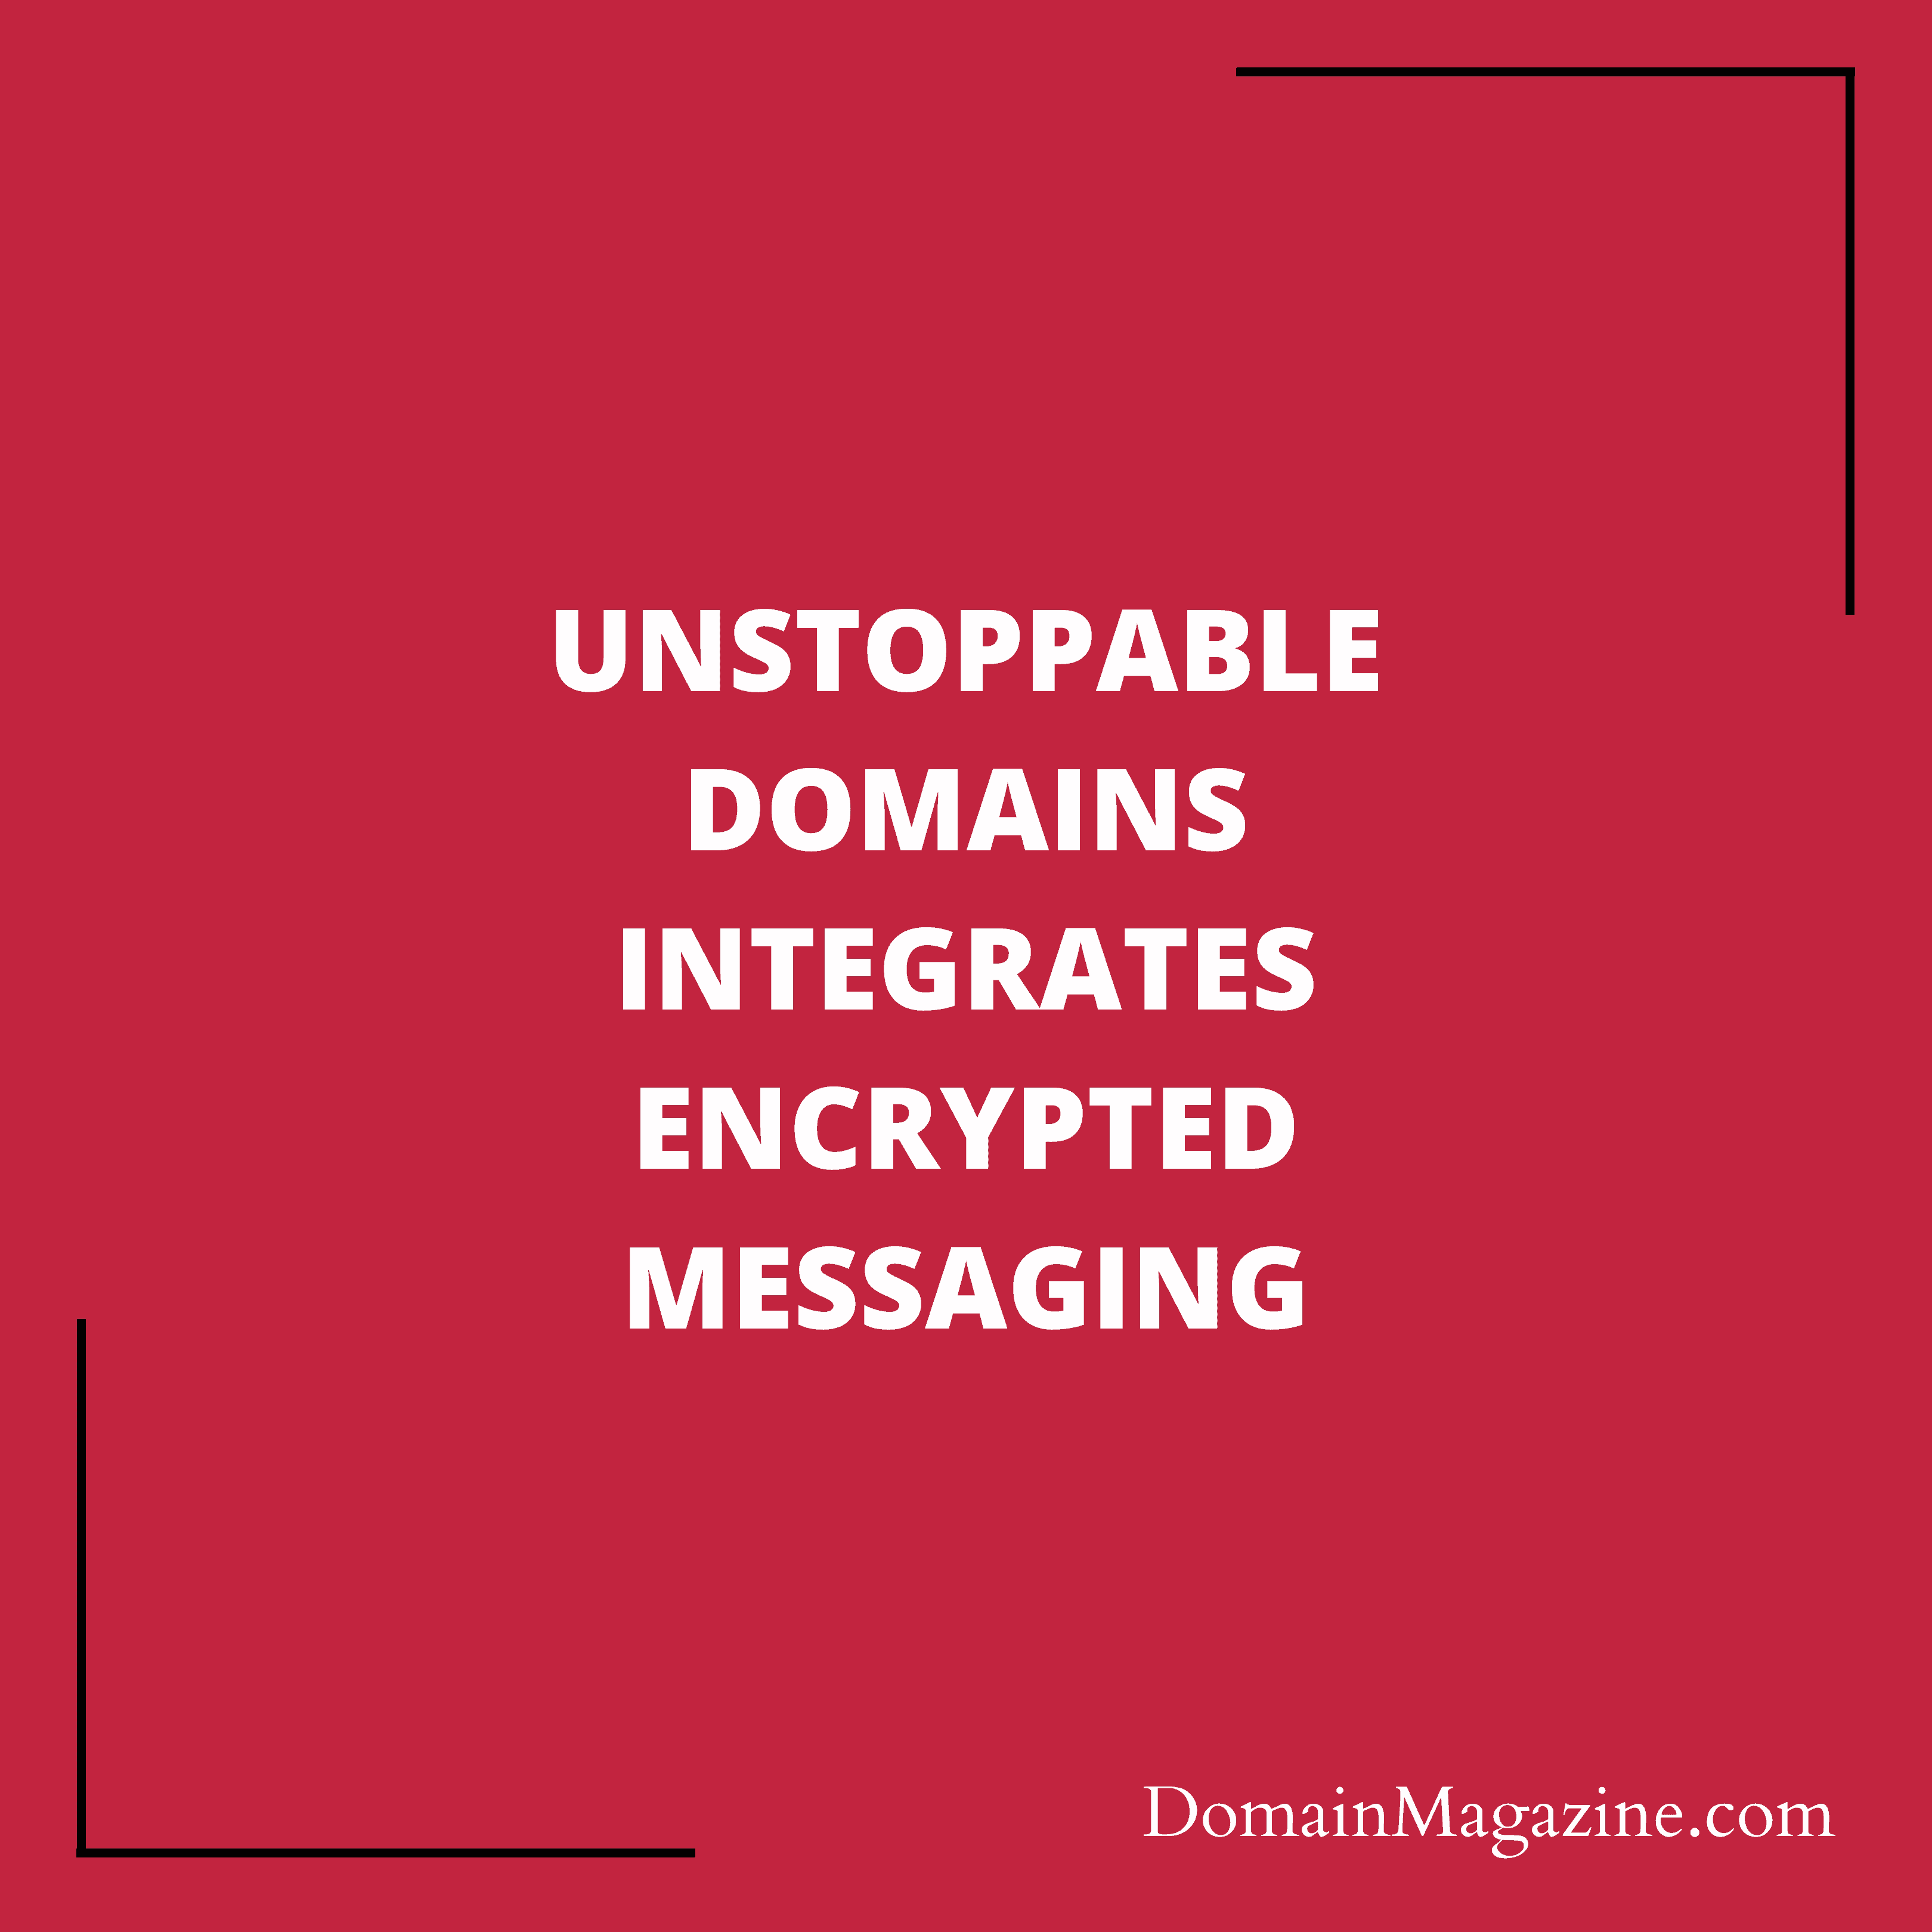 Unstoppable Domains integrates encrypted messaging